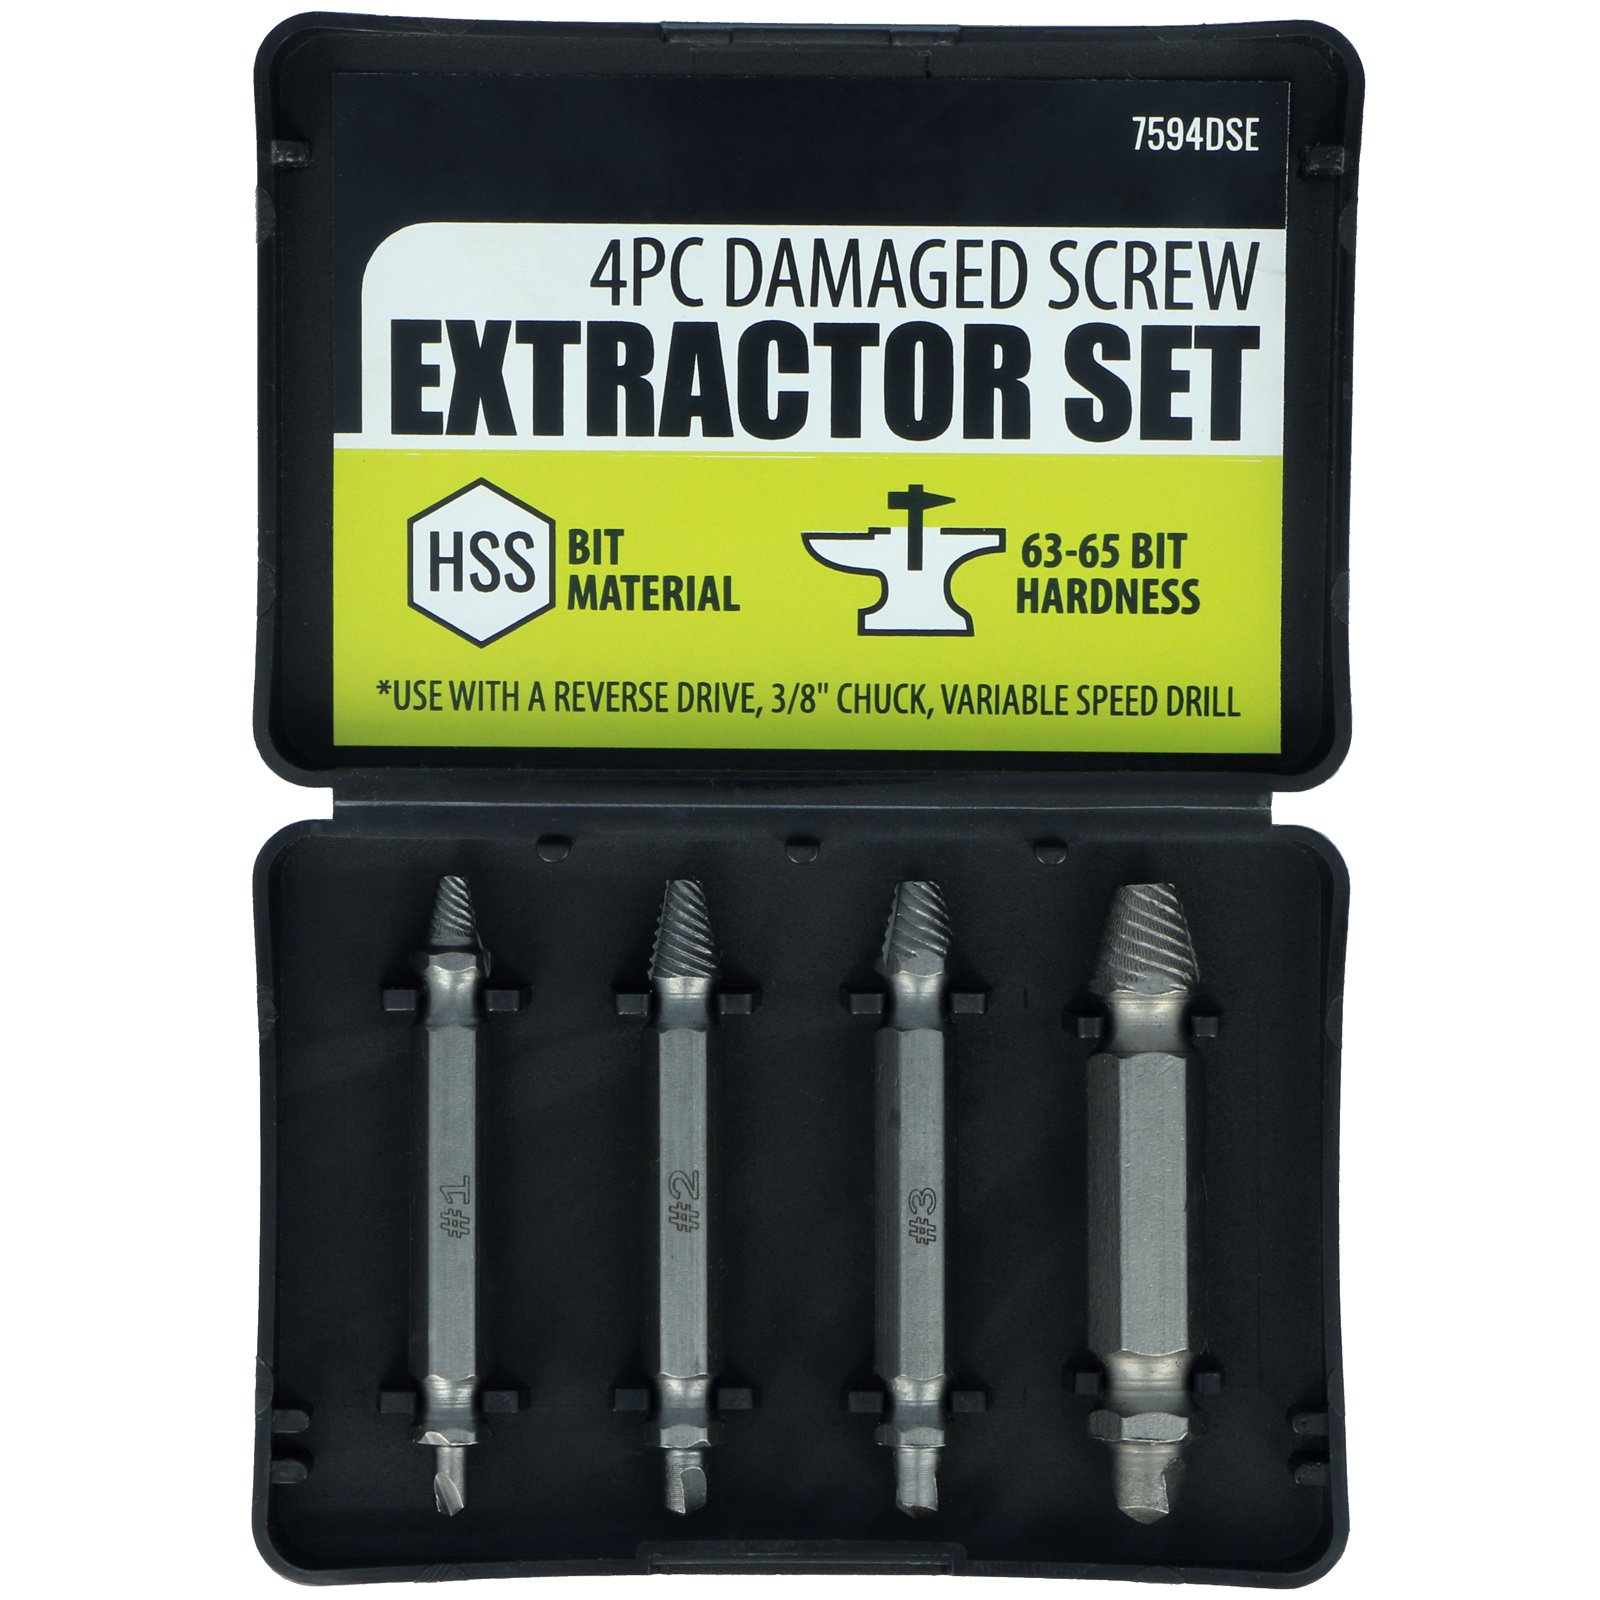 Universal Tool Damaged Screw Extractor Set - 4 Pieces Assorted Sizes